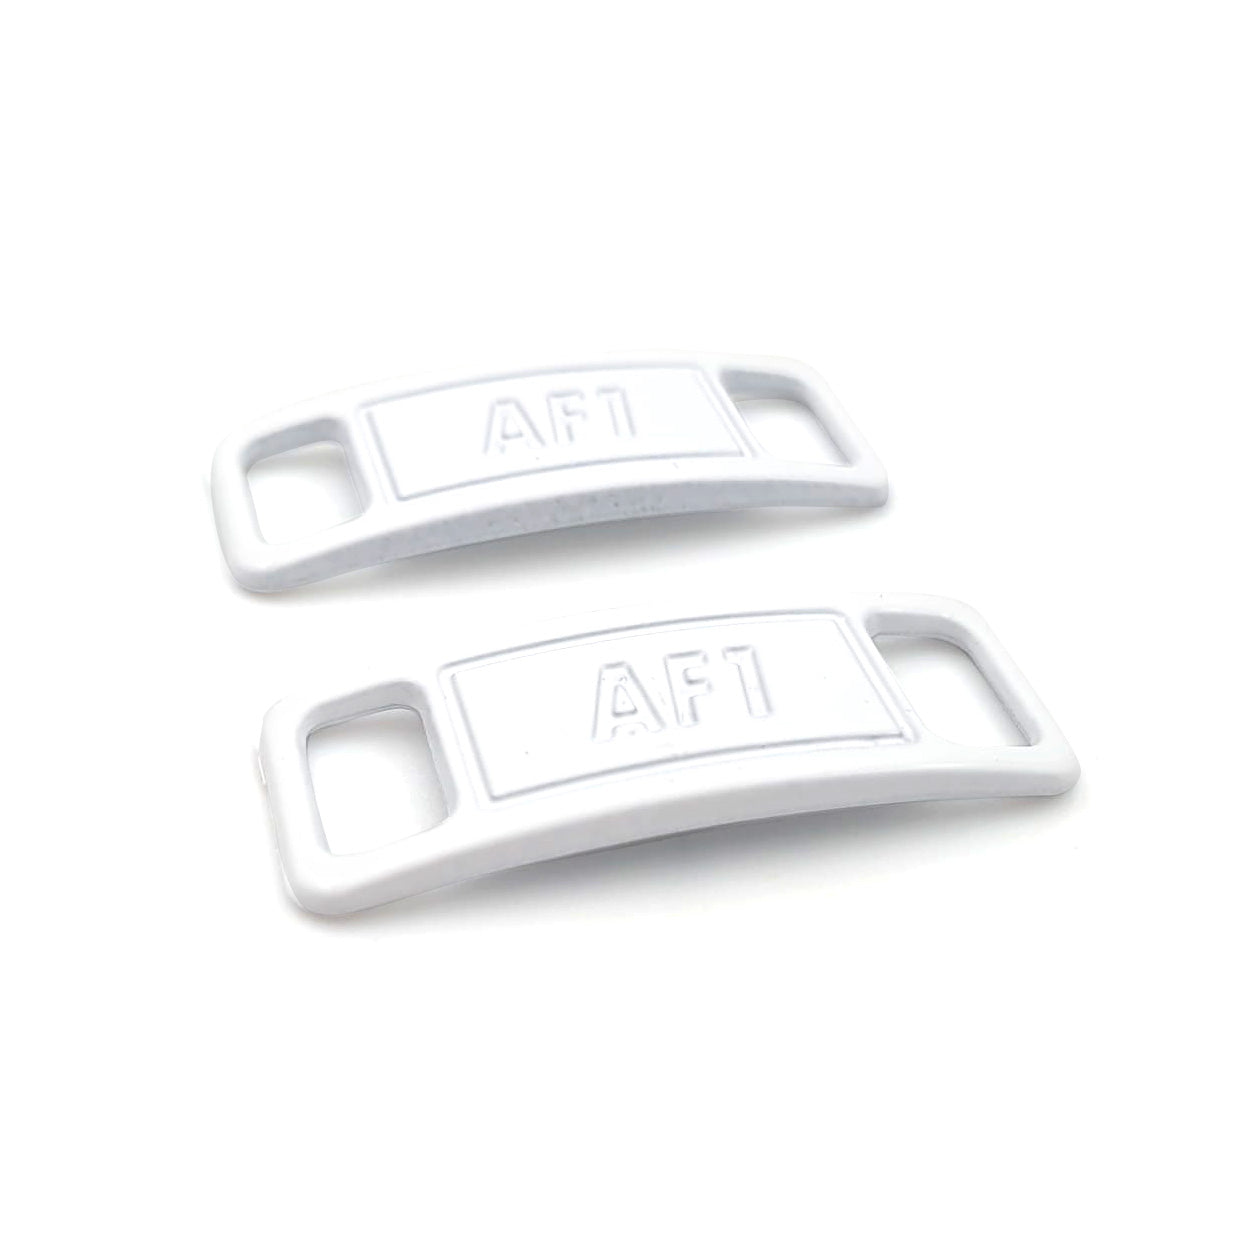 Lace Tags Af1, 1 pair, white